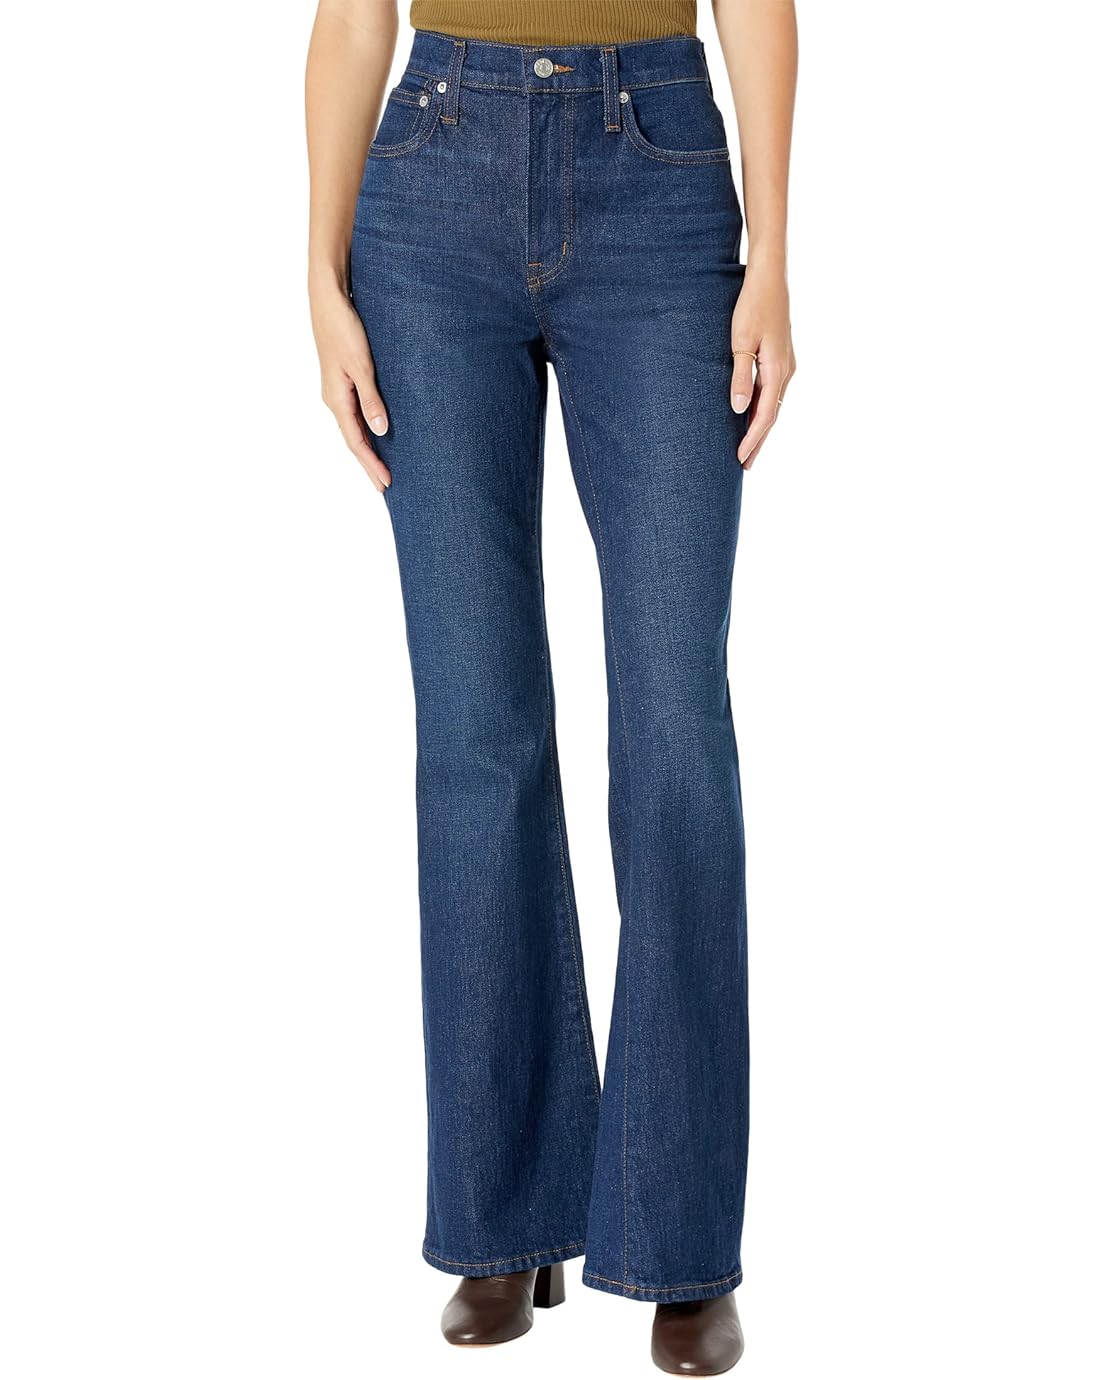 Madewell The Perfect Vintage Flare Jean in Beaucourt Wash